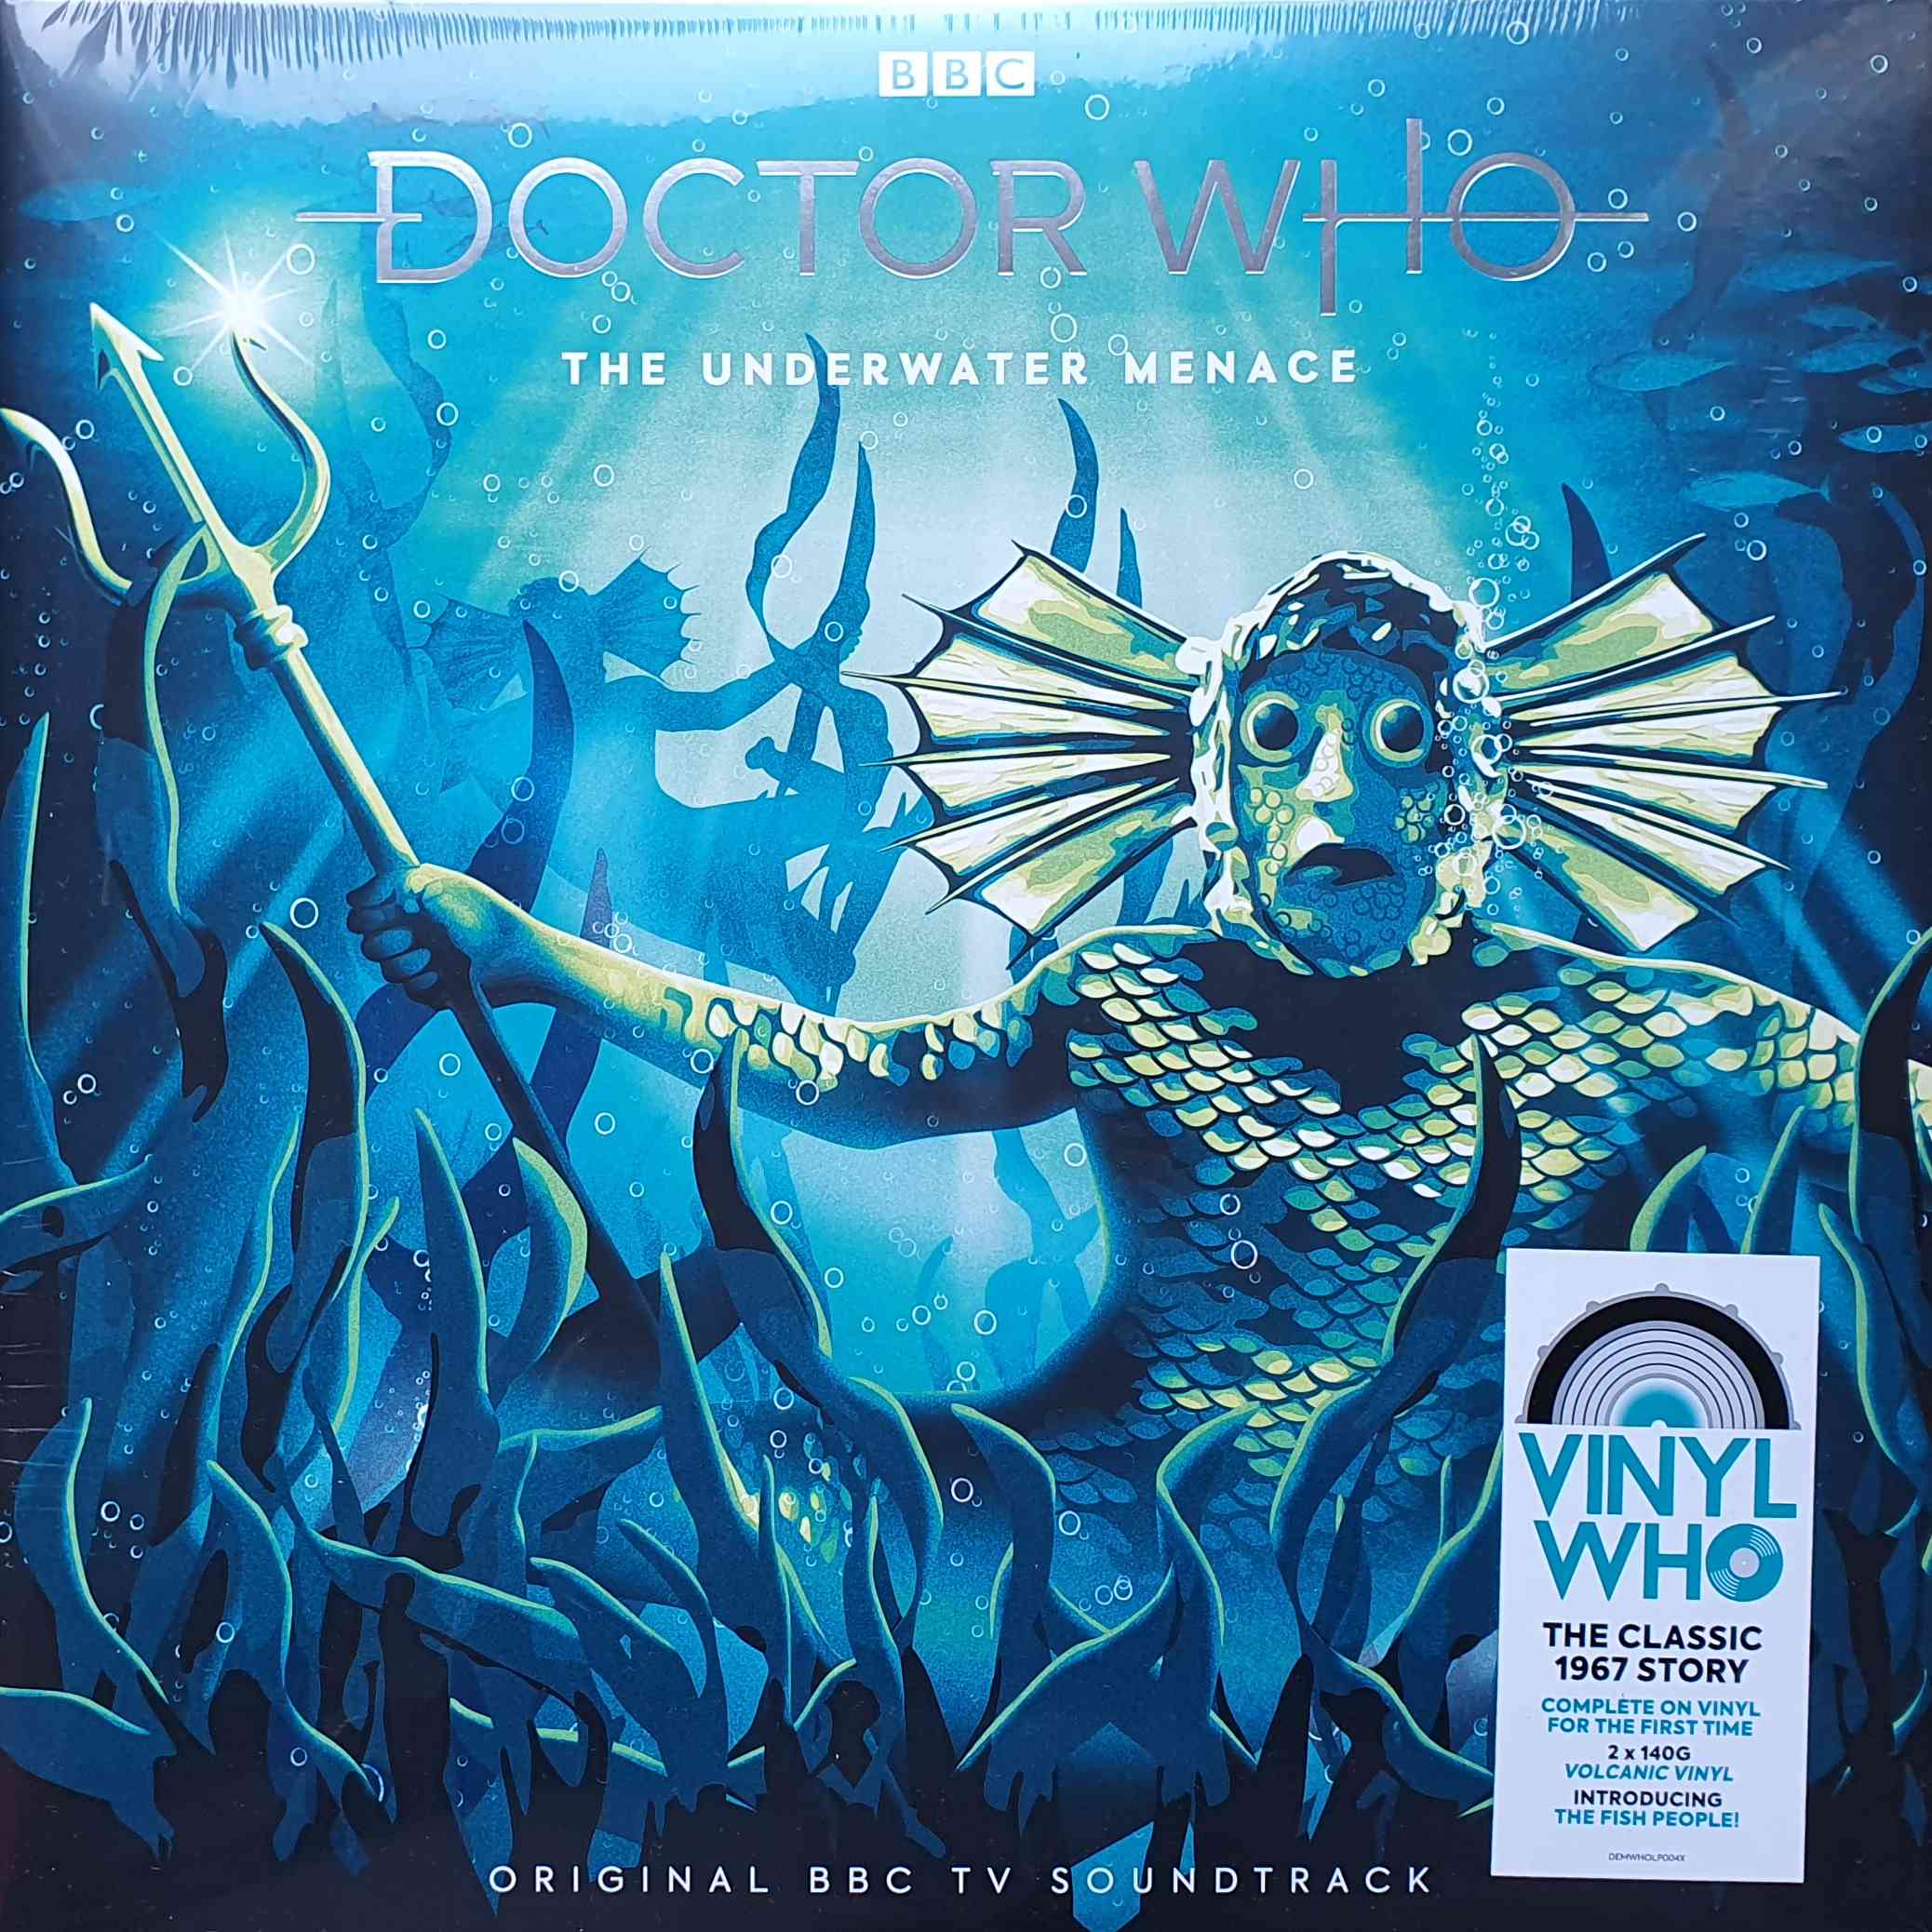 Picture of DEMWHOLP004X Doctor Who - The underwater menace by artist Geoffrey Orme from the BBC records and Tapes library